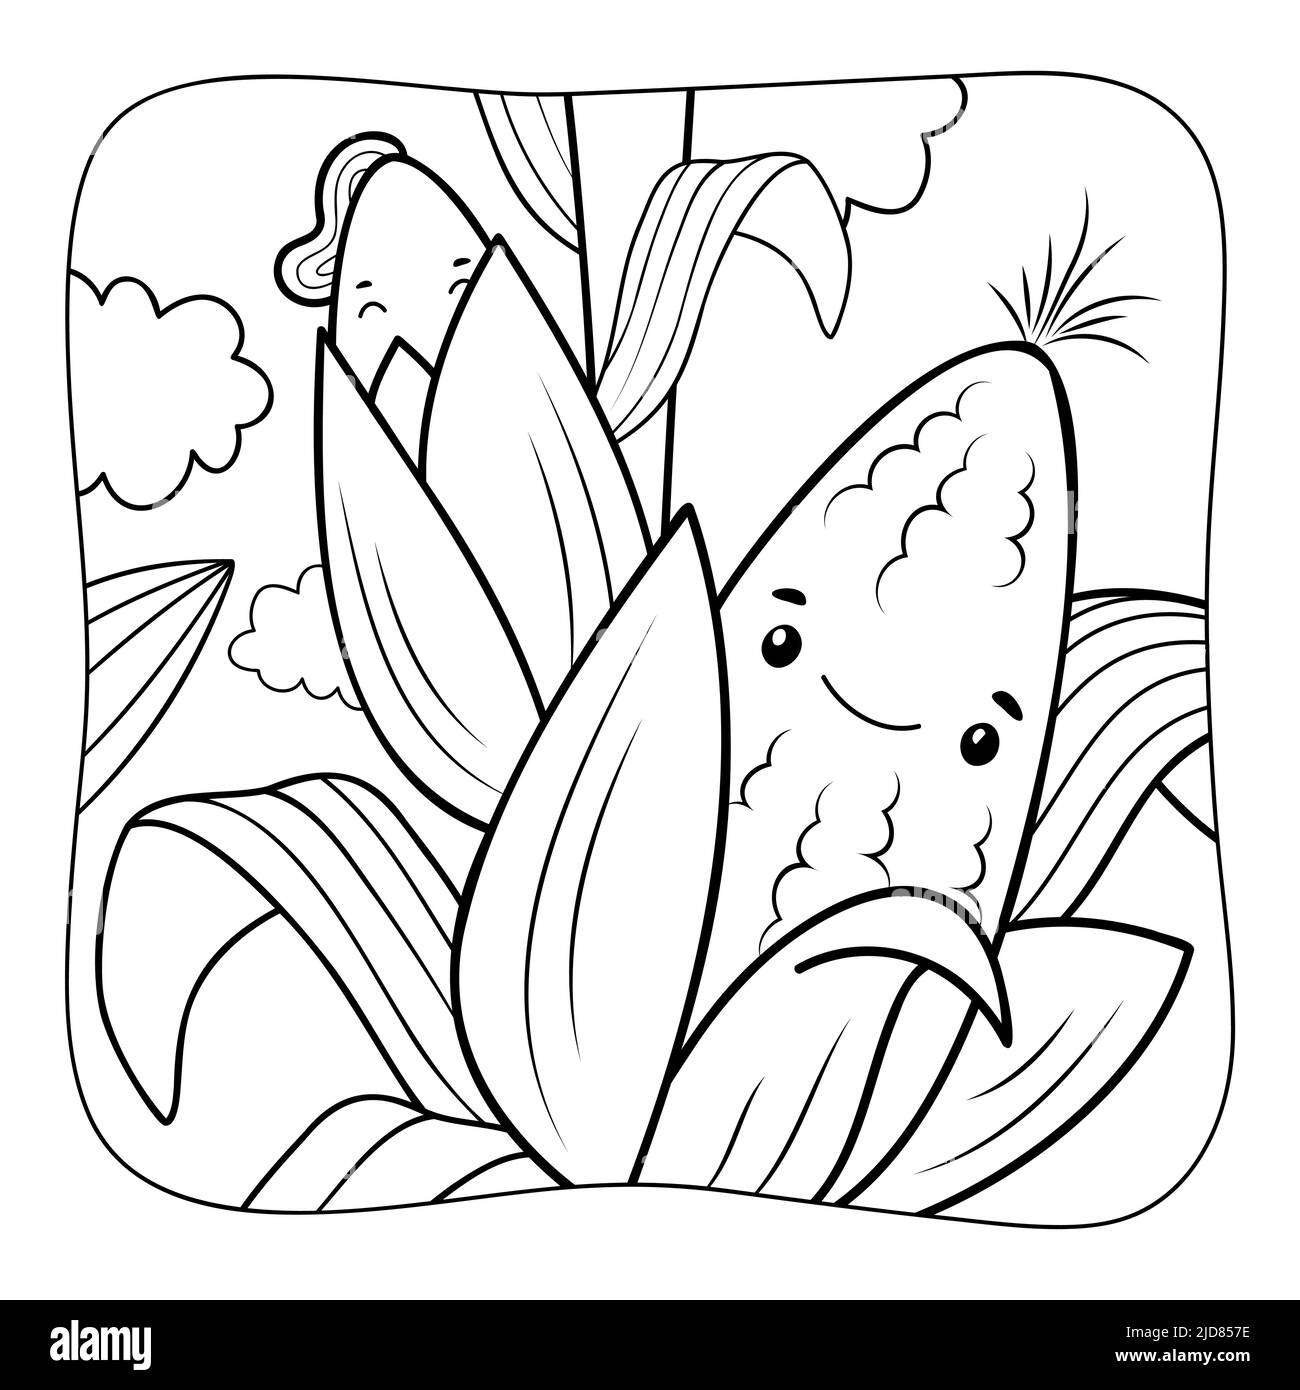 Corn black and white coloring book or coloring page for kids nature background vector illustration stock vector image art